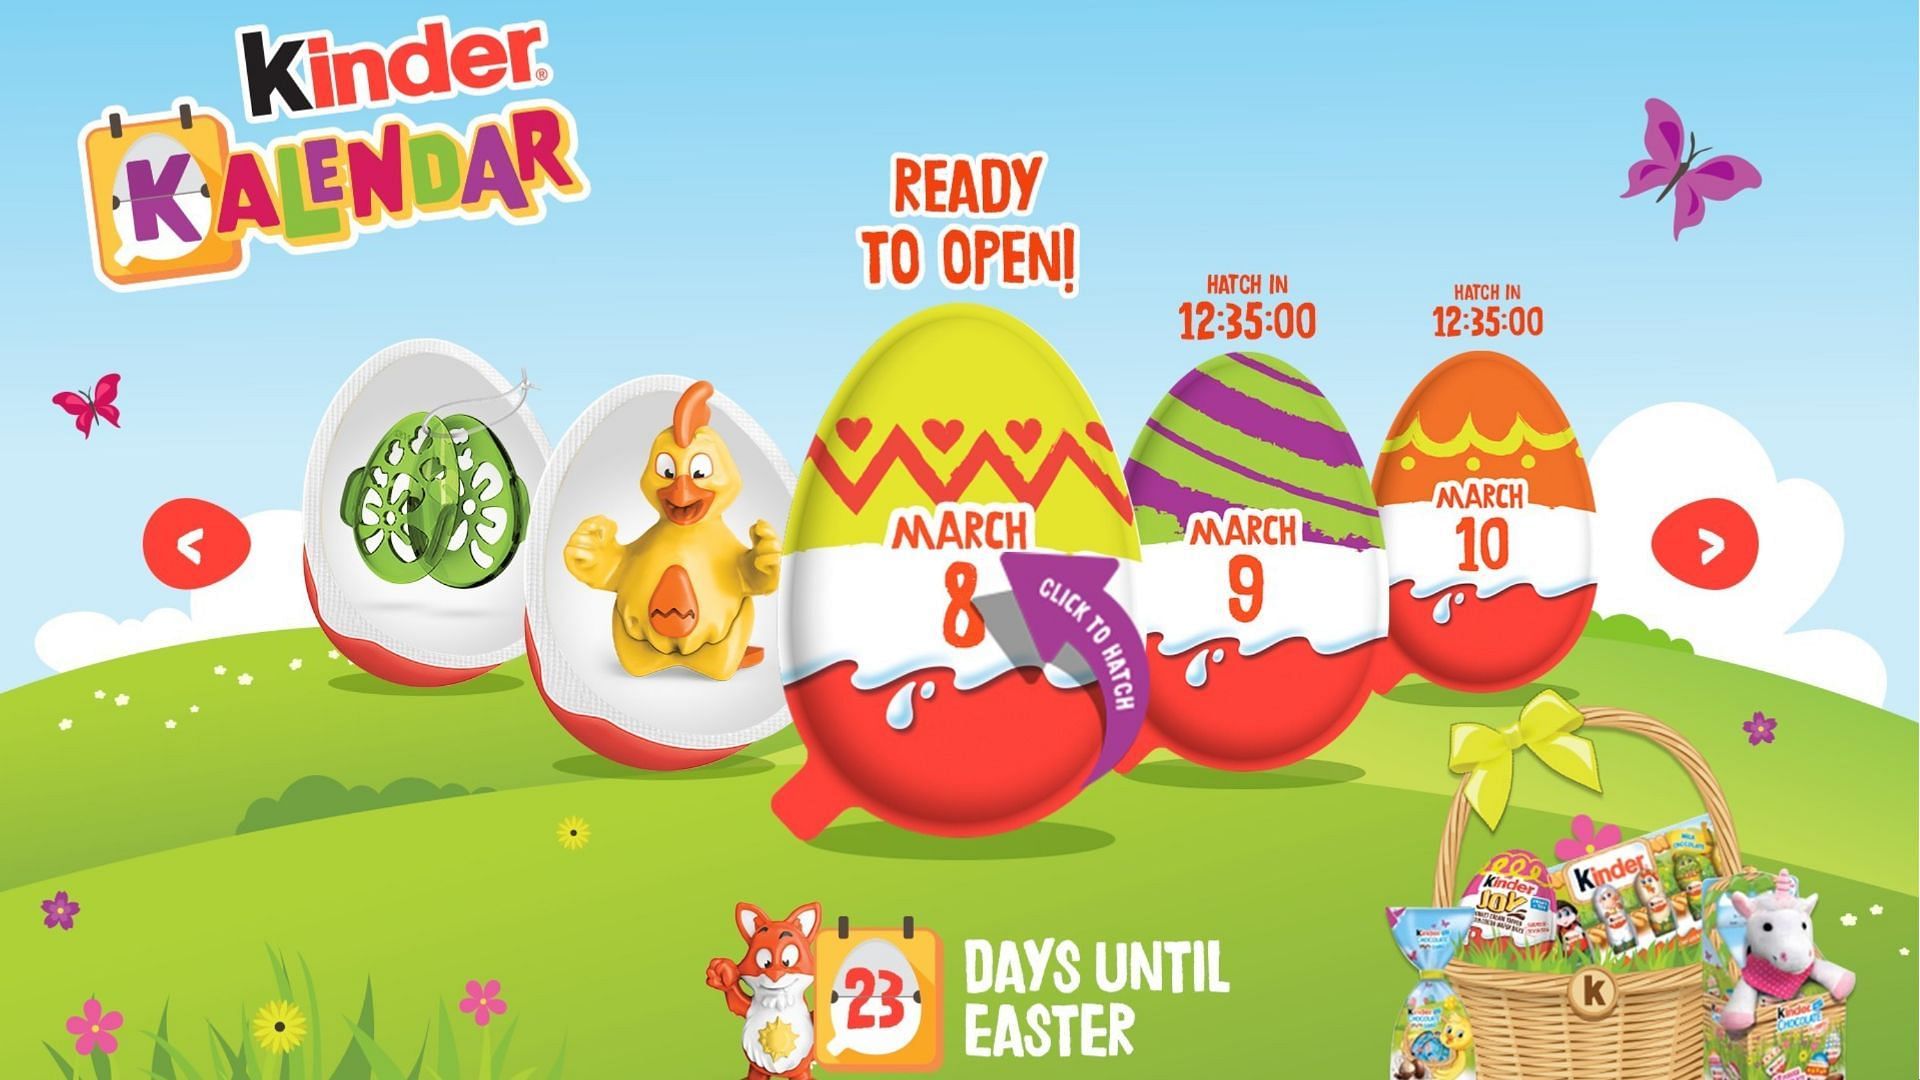 the Kinder Kalendar website offers fun spring and easter activities to enjoy with your family every day until April 3 (Image via Ferrero)